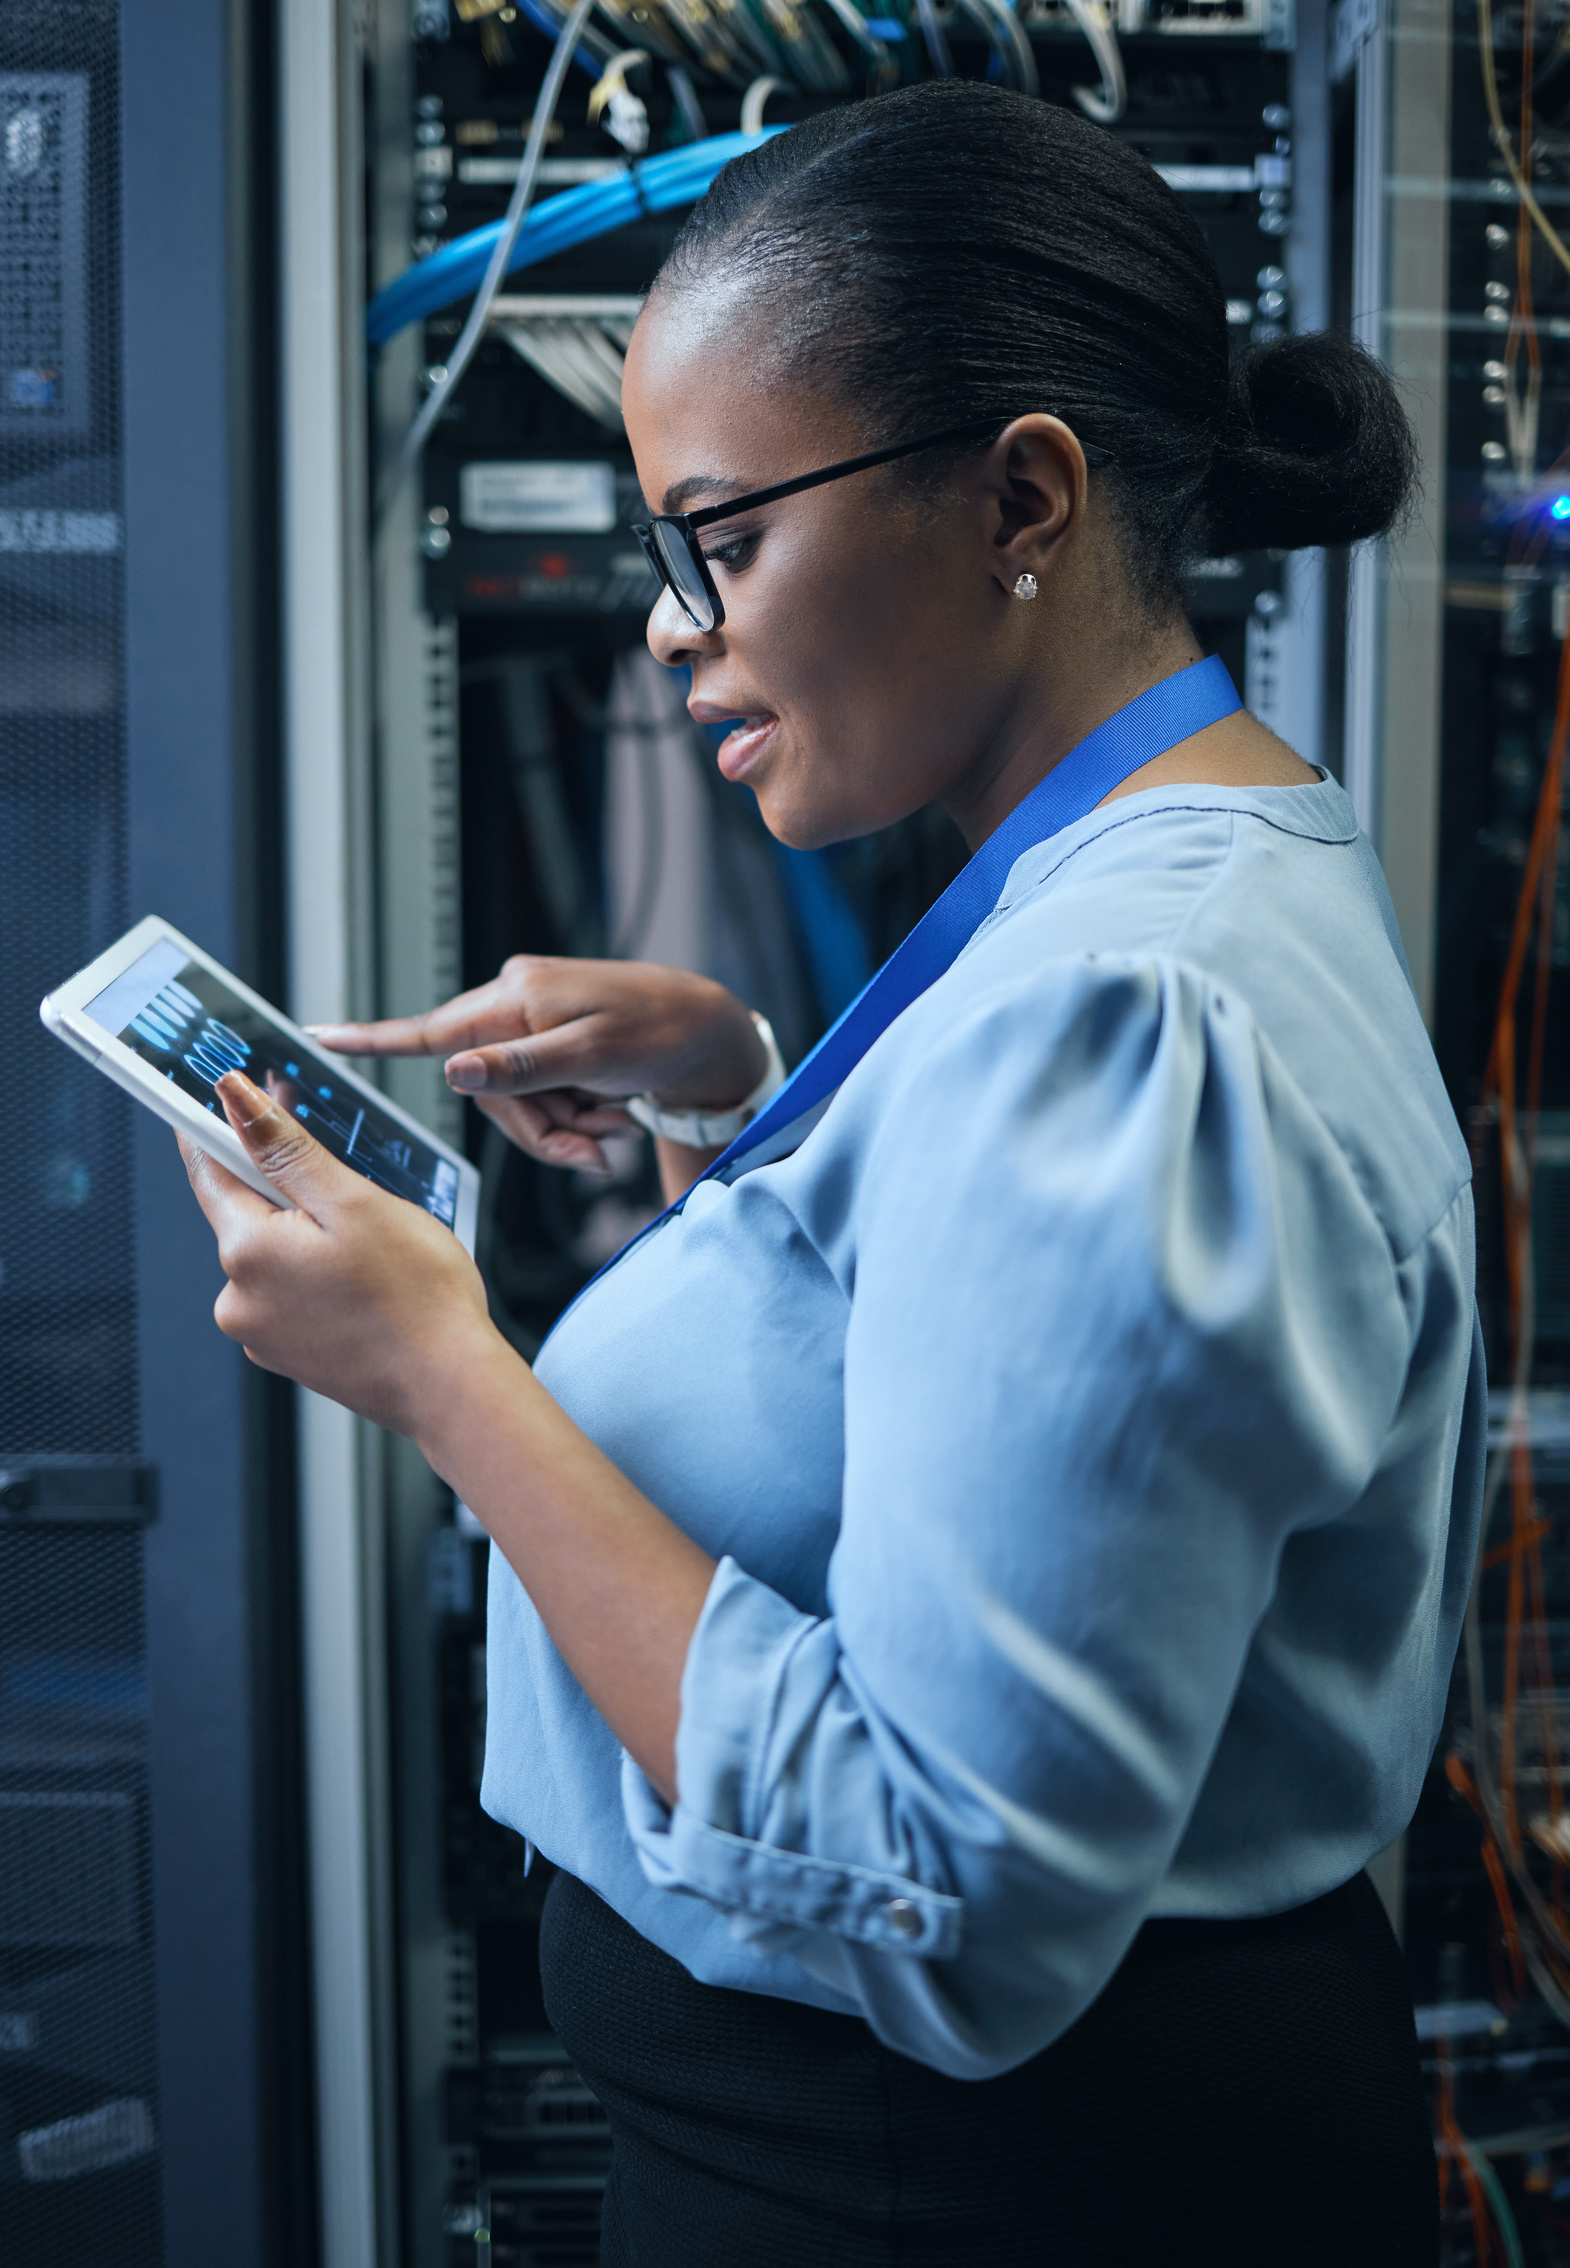 IT Woman, Engineer and Tablet in a Server Room for Programming, Cybersecurity or Maintenance. Black Female Technician in Datacenter for Network, Software or System Upgrade App with Technology